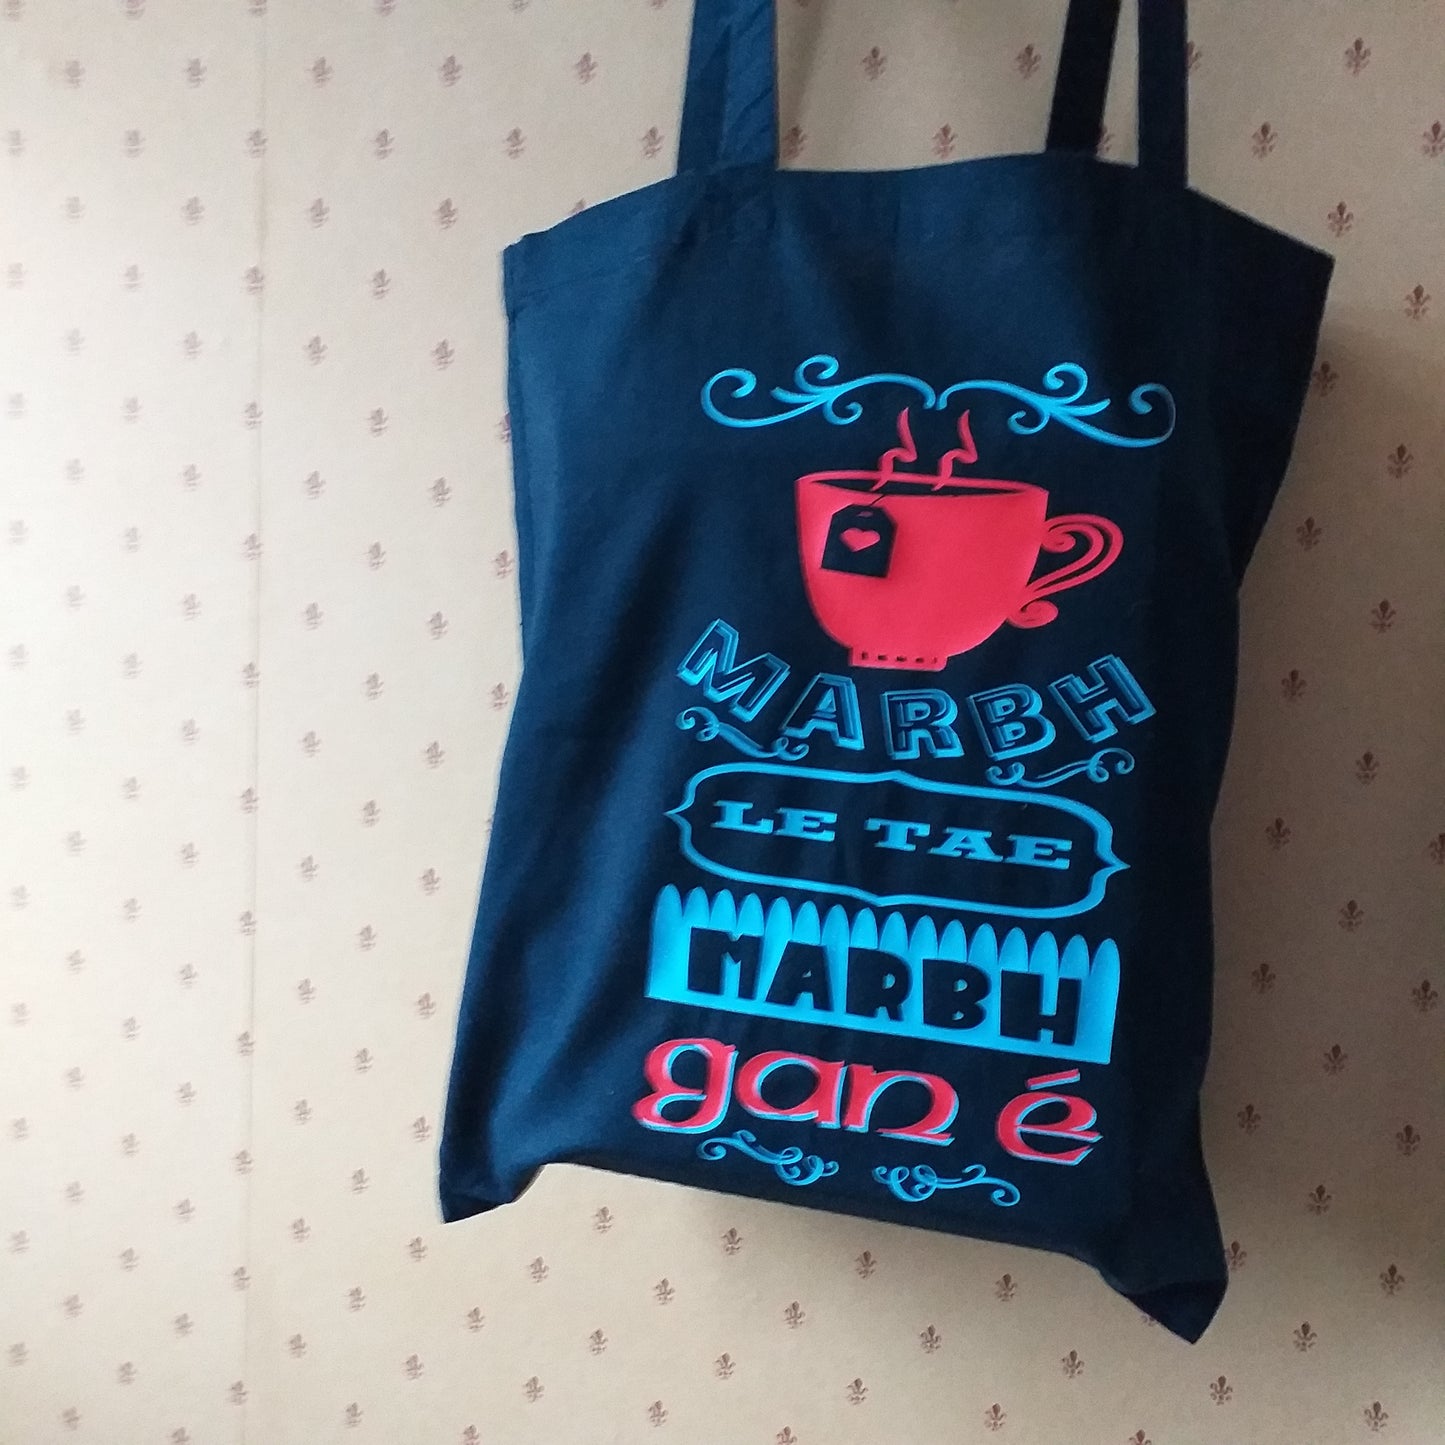 Tote bag for tea drinkers!